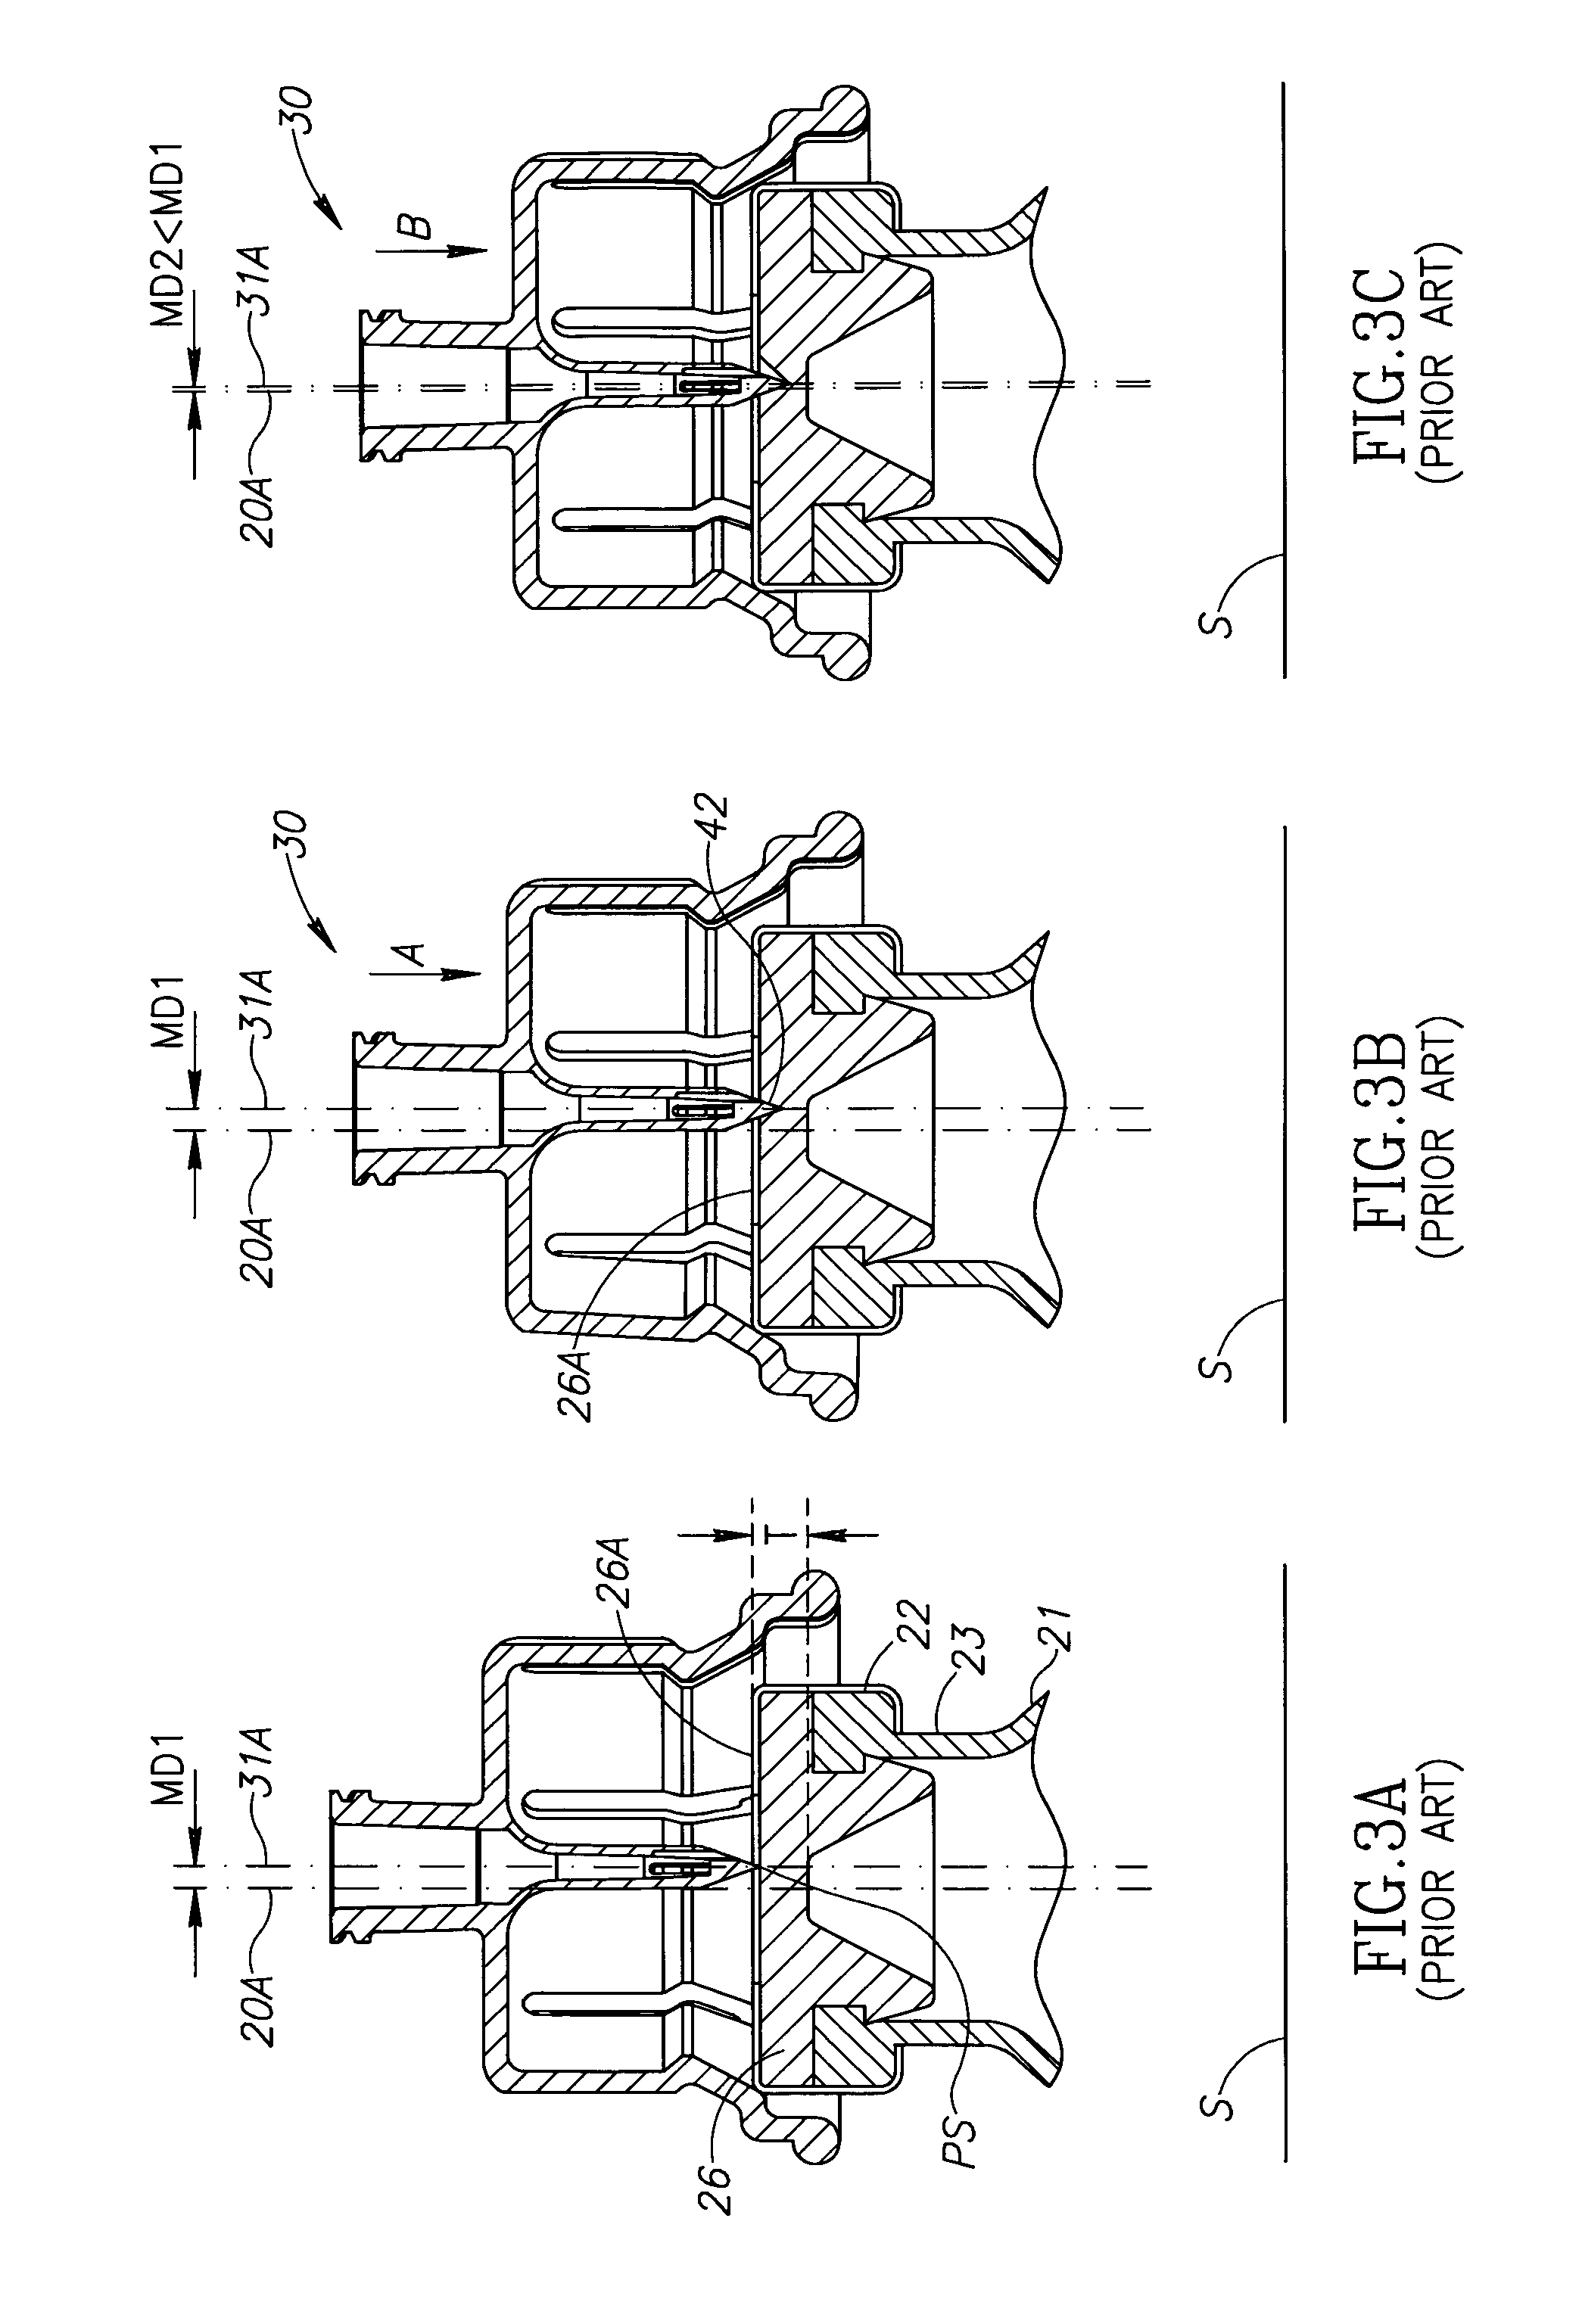 Fluid transfer devices with sealing arrangement